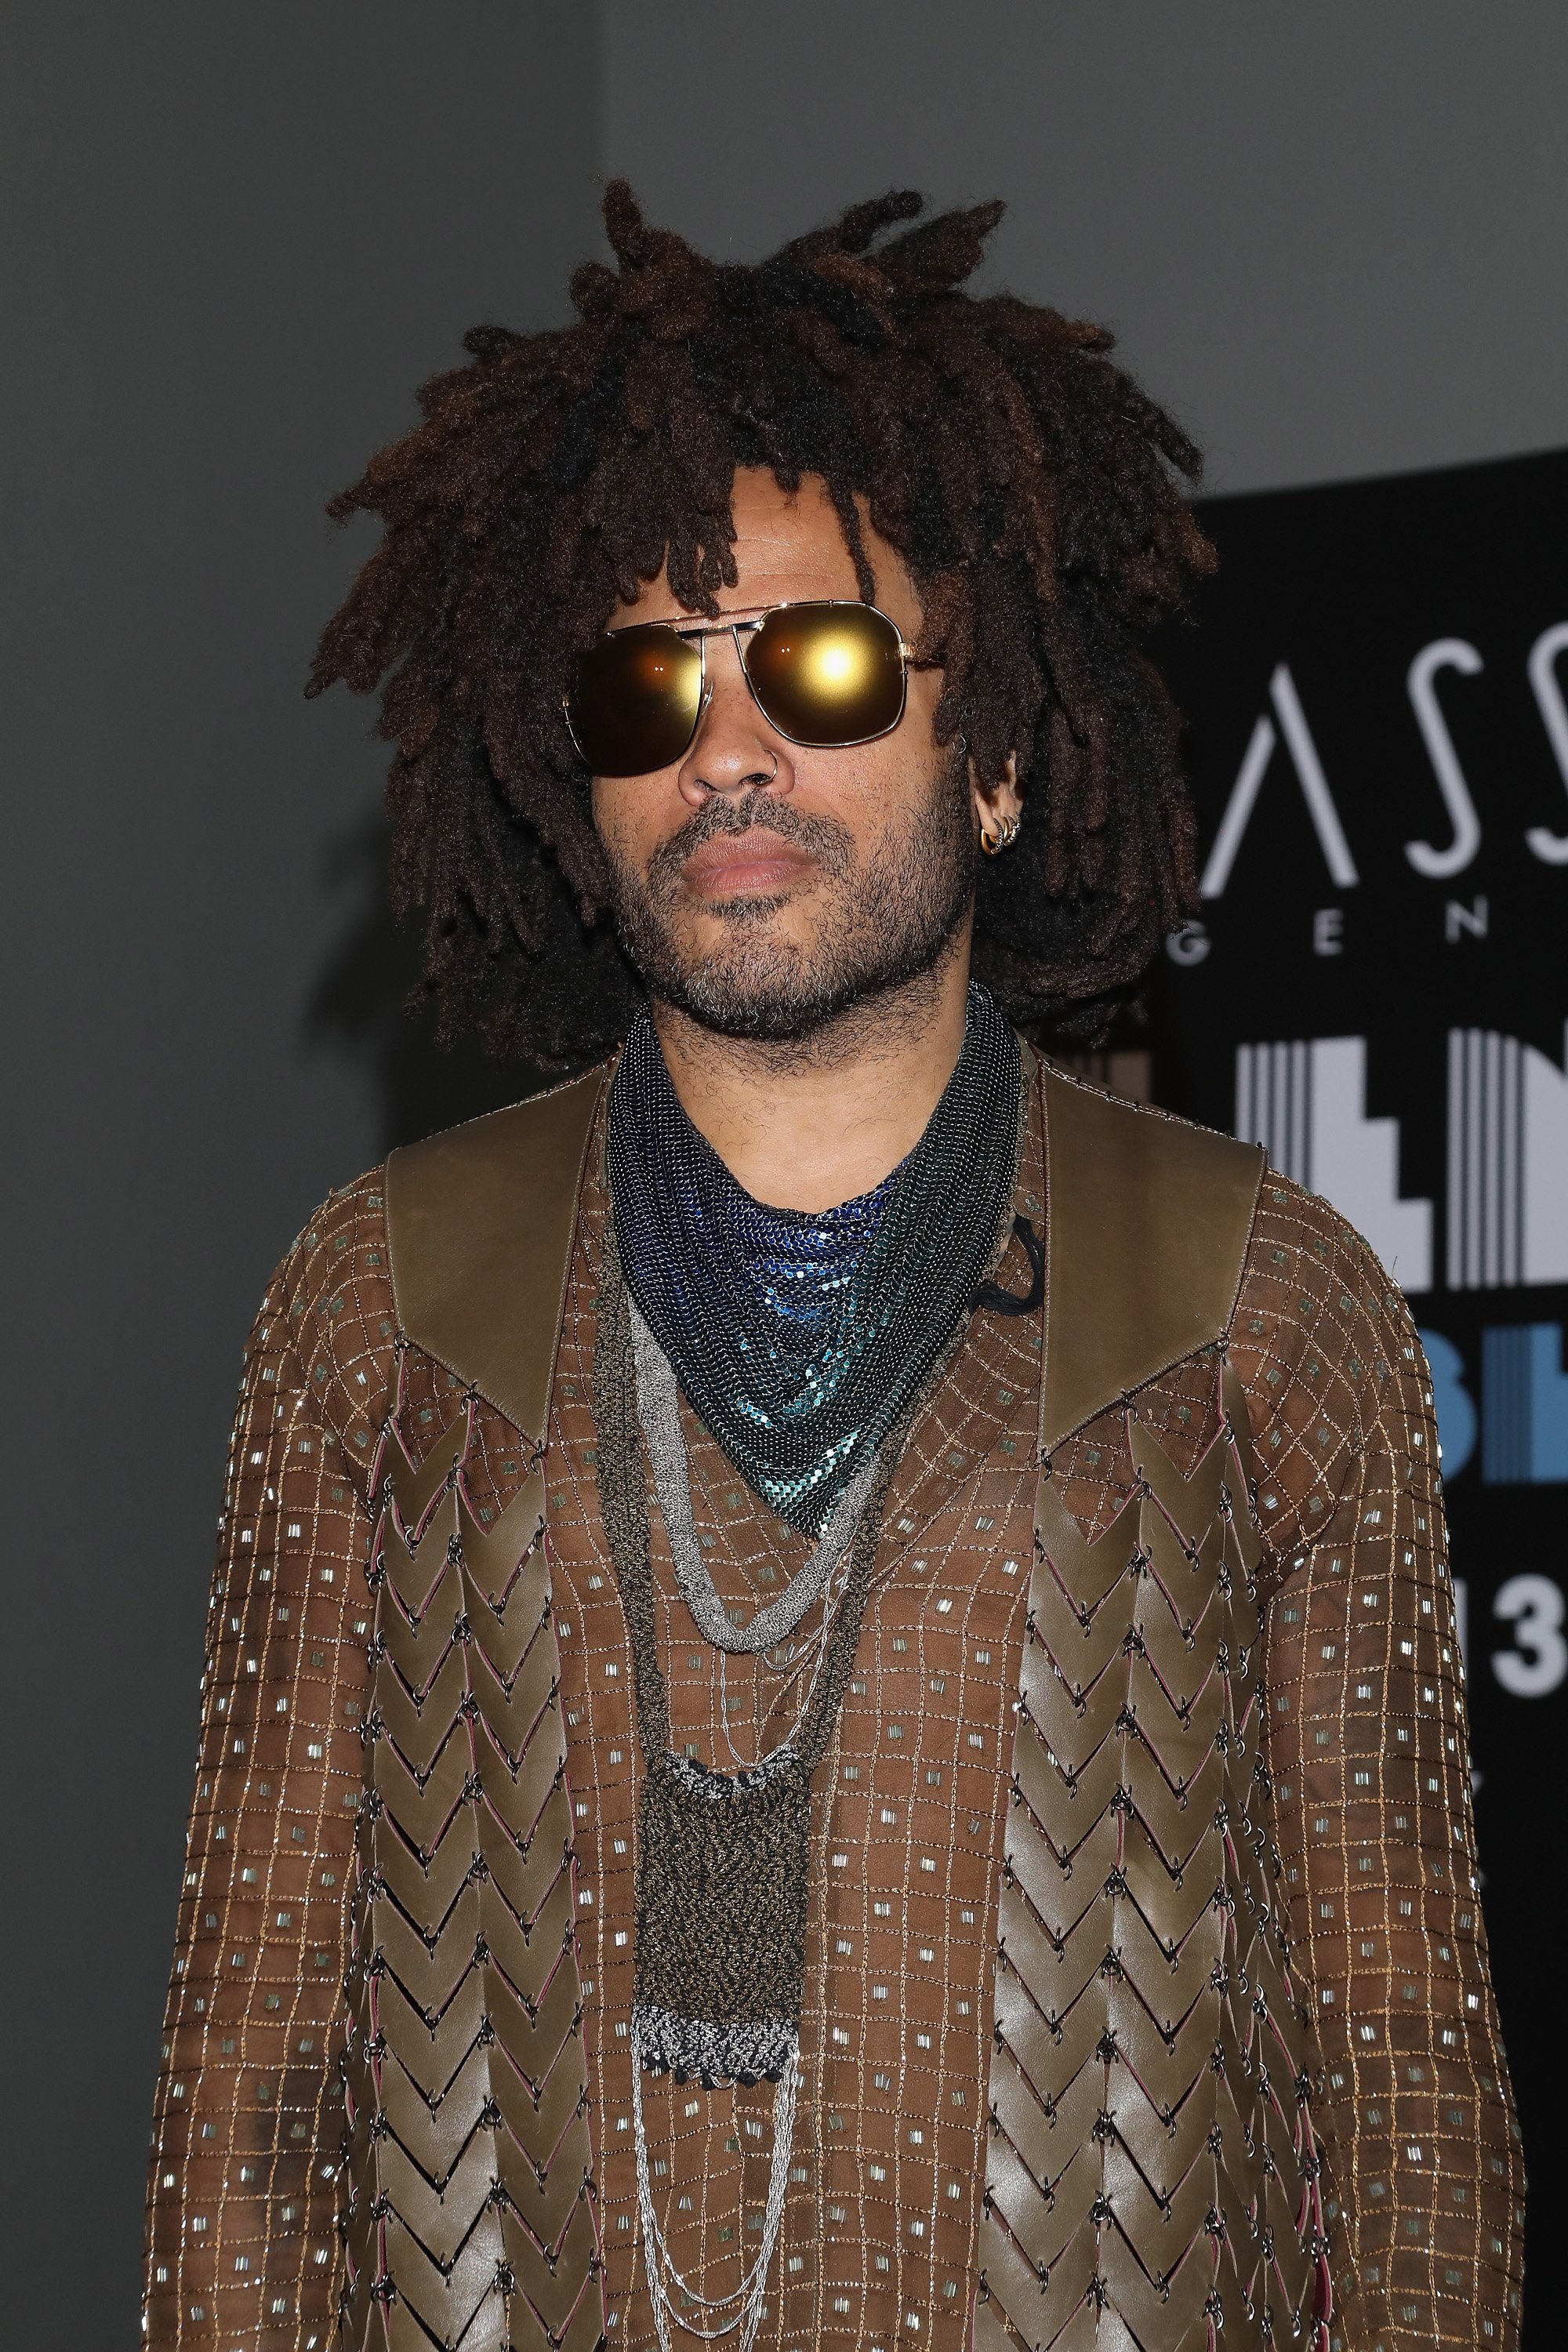 Lenny Kravitz attends a press conference to promote his "Raise Vibration Tour" at St. Regis Hotel on April 11, 2018 | Photo: GettyImages